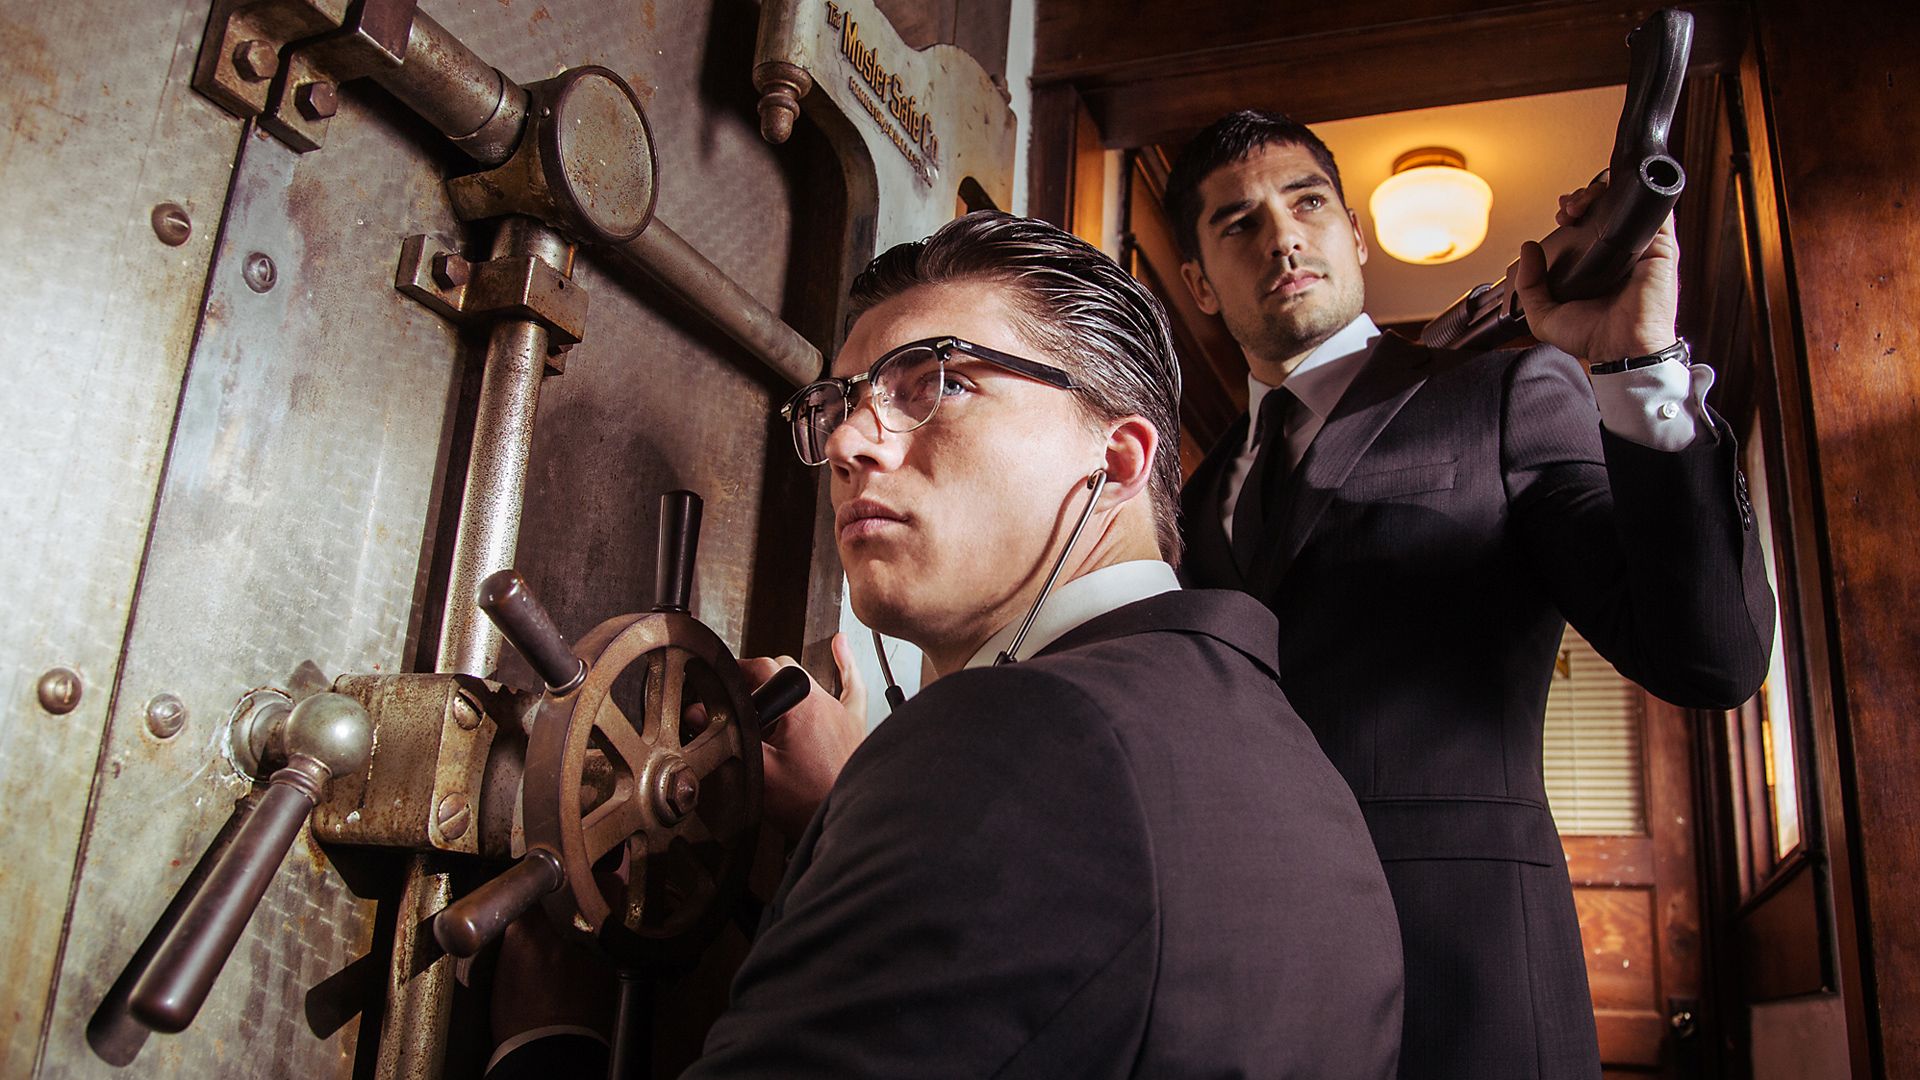 TV Show From Dusk Till Dawn: The Series HD Wallpaper | Background Image